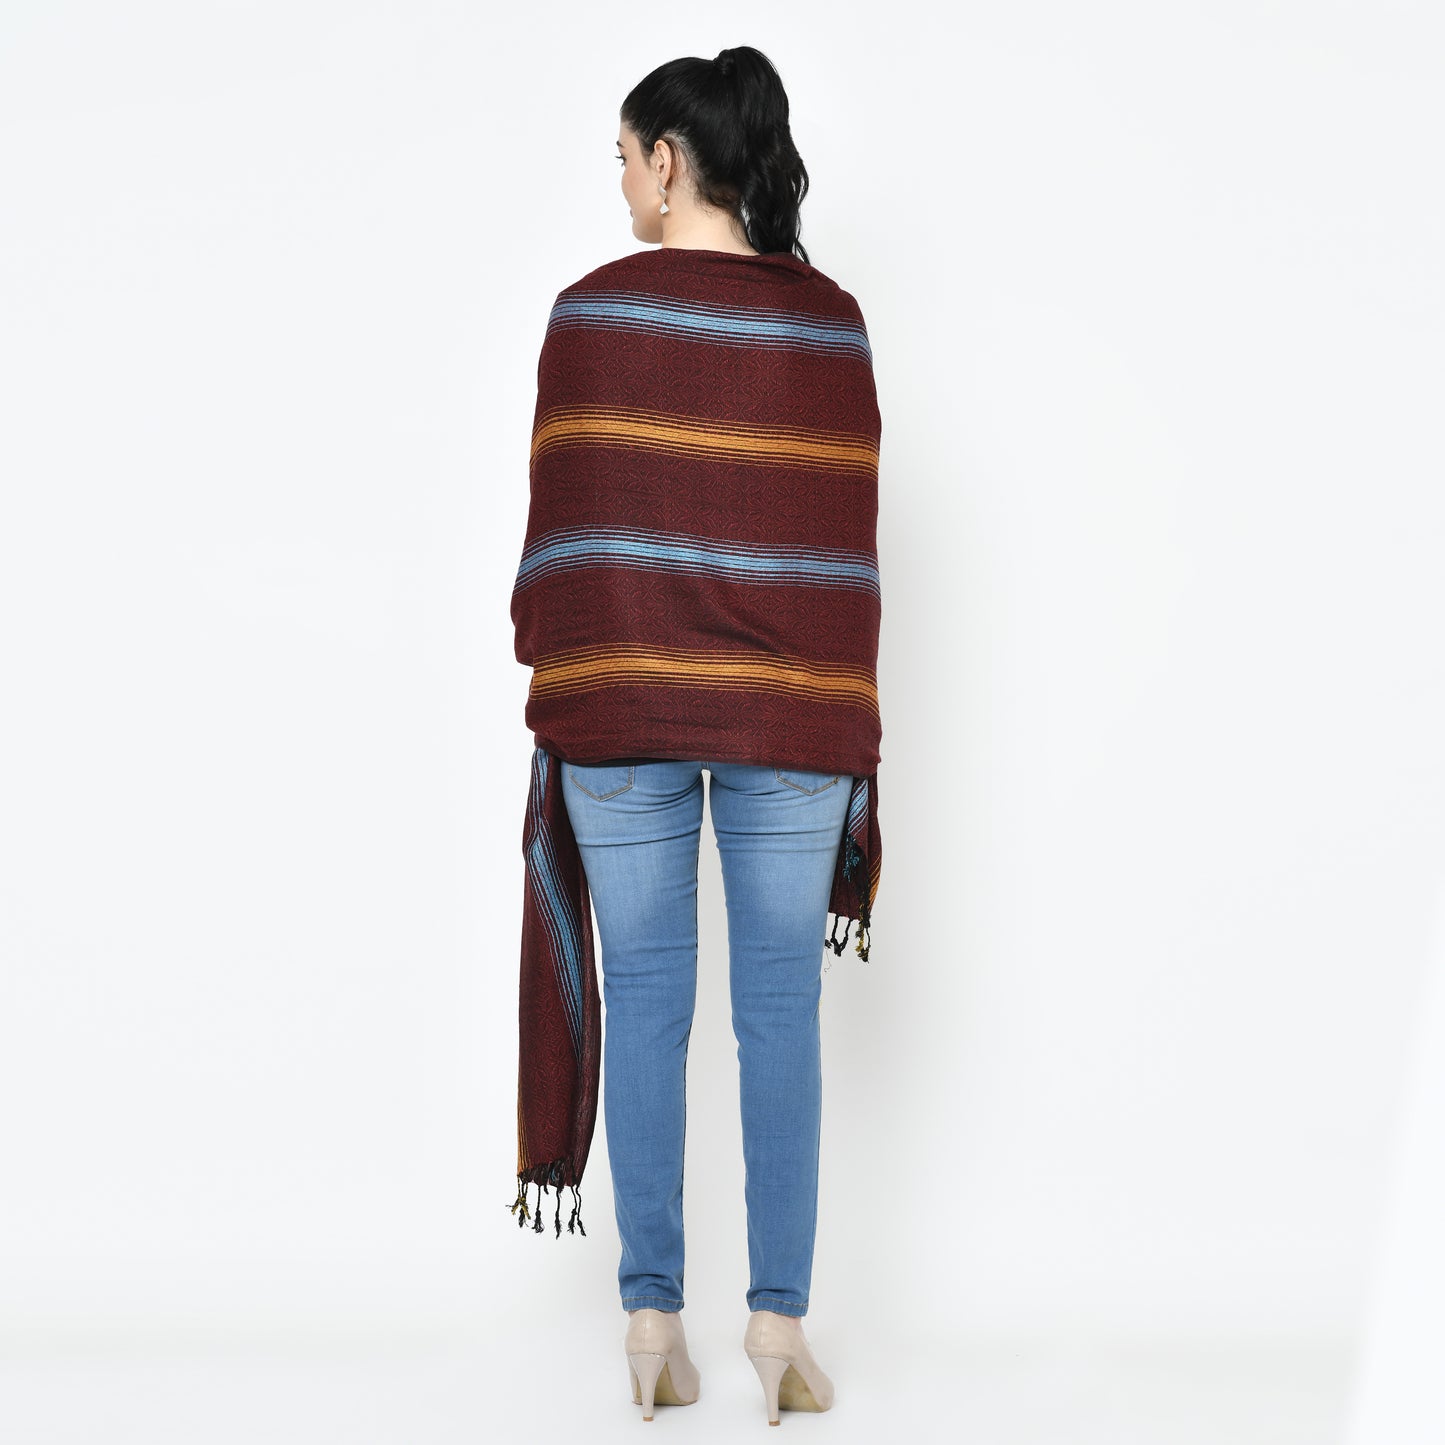 The Striped Stole